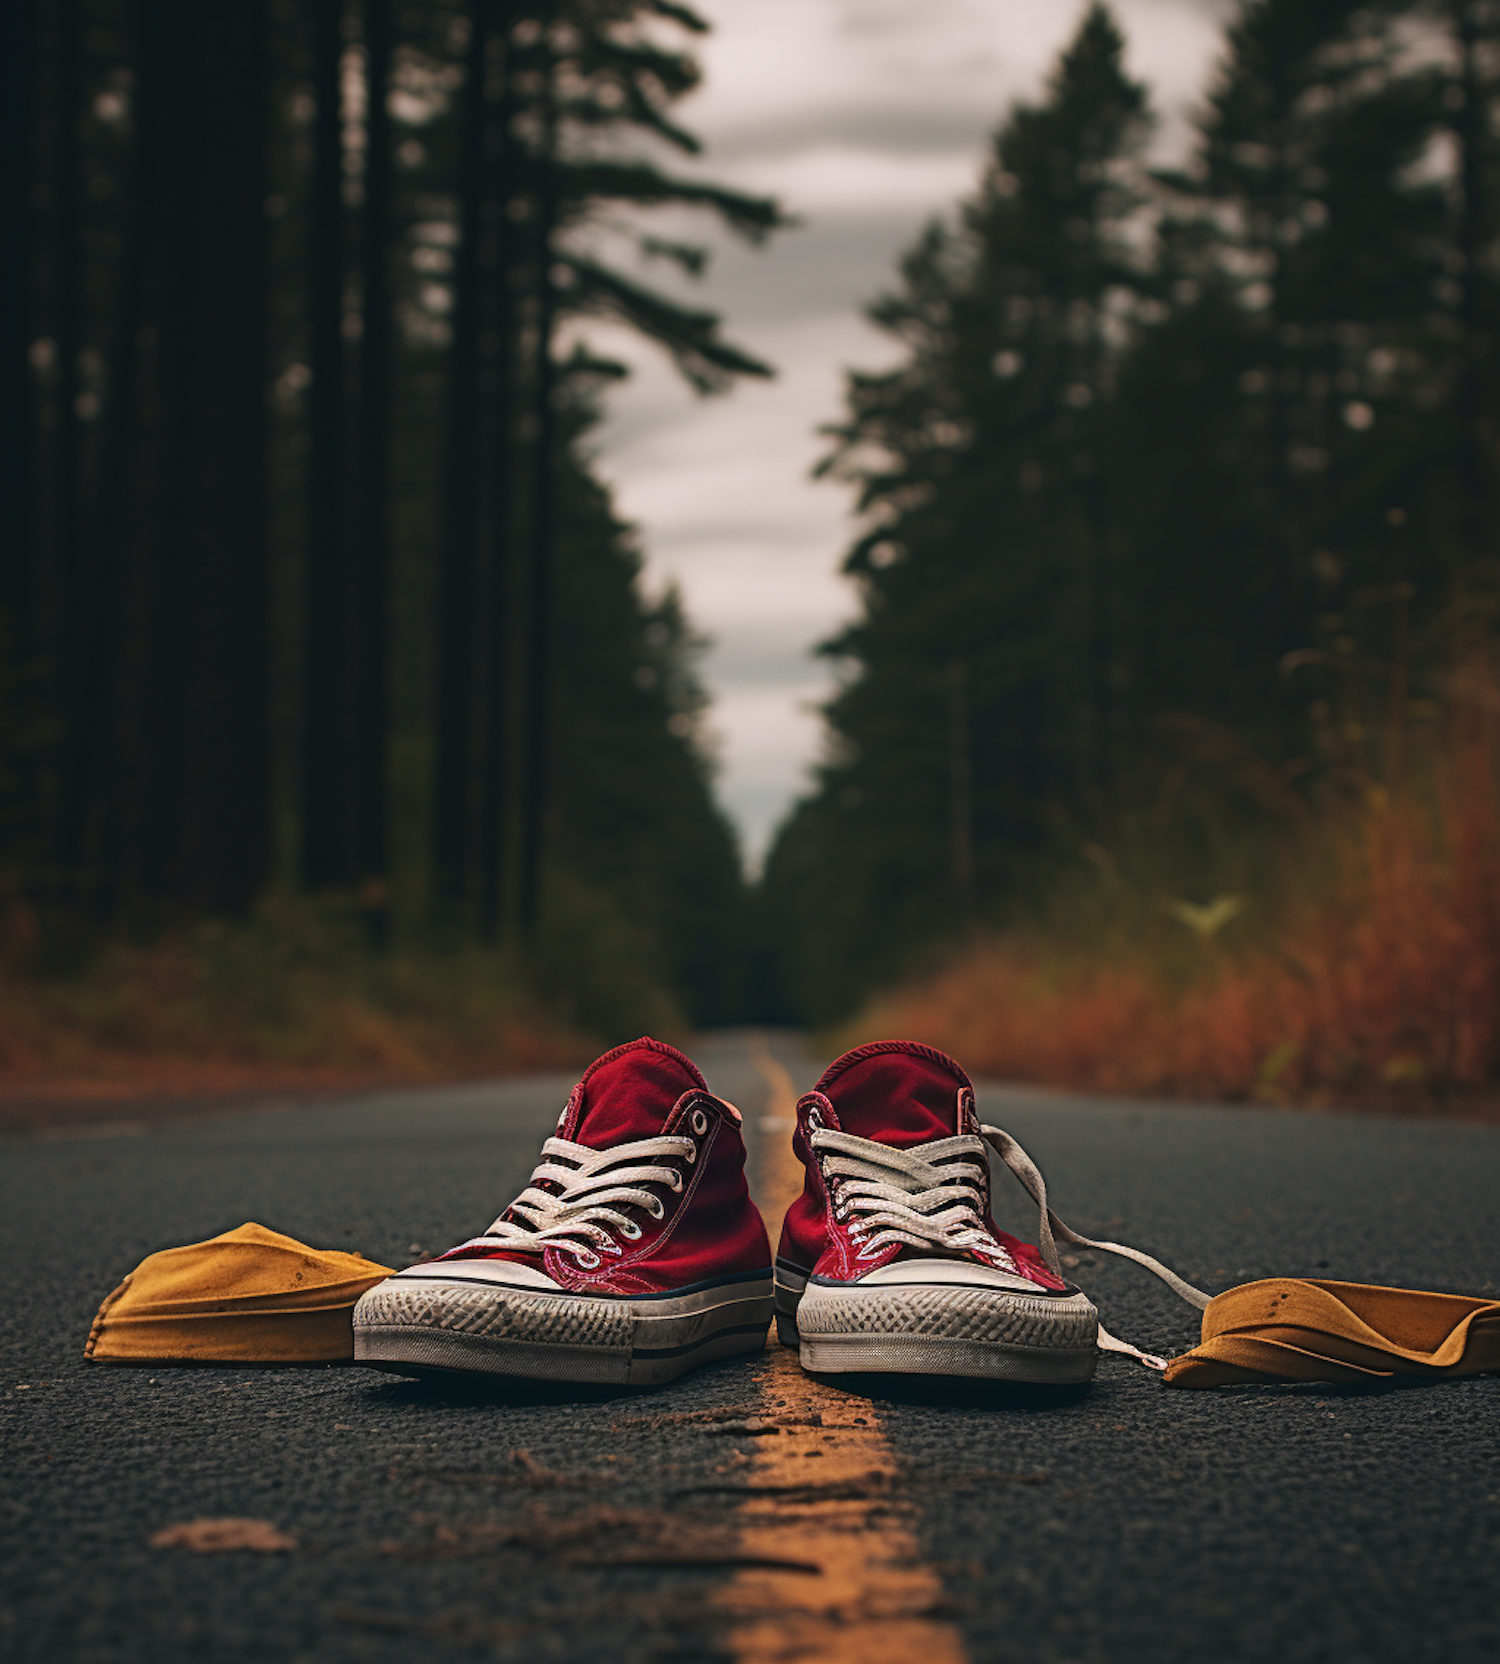 Solitary Journey: Red Sneakers on a Moody Forest Road